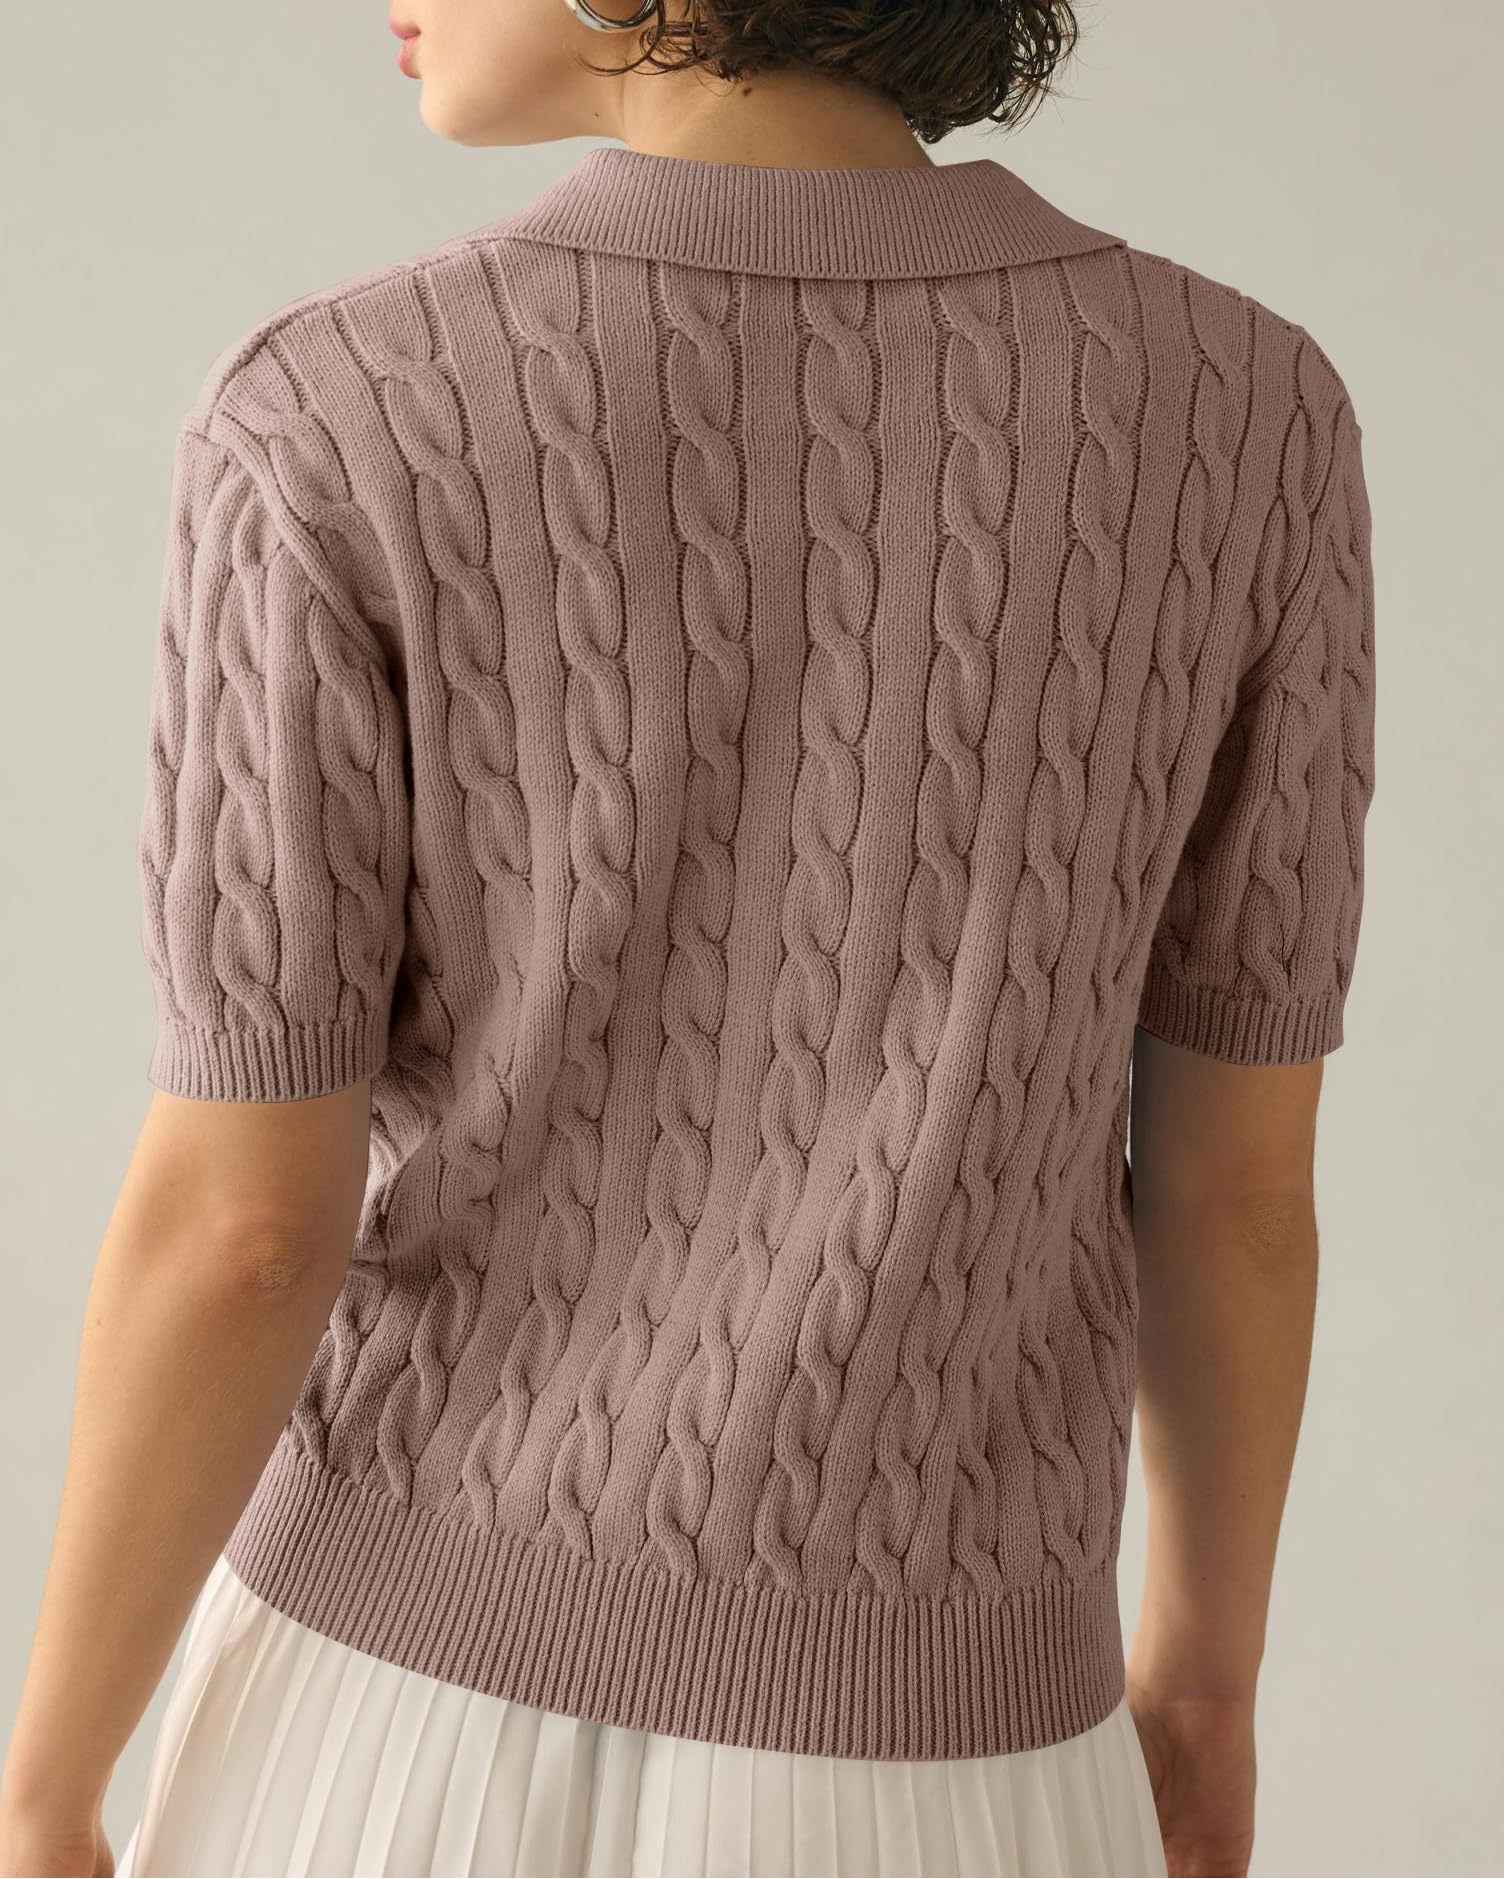 NTG Fad TOP Cable Short Sleeve Solid Lapel V Neck Knit Sweater